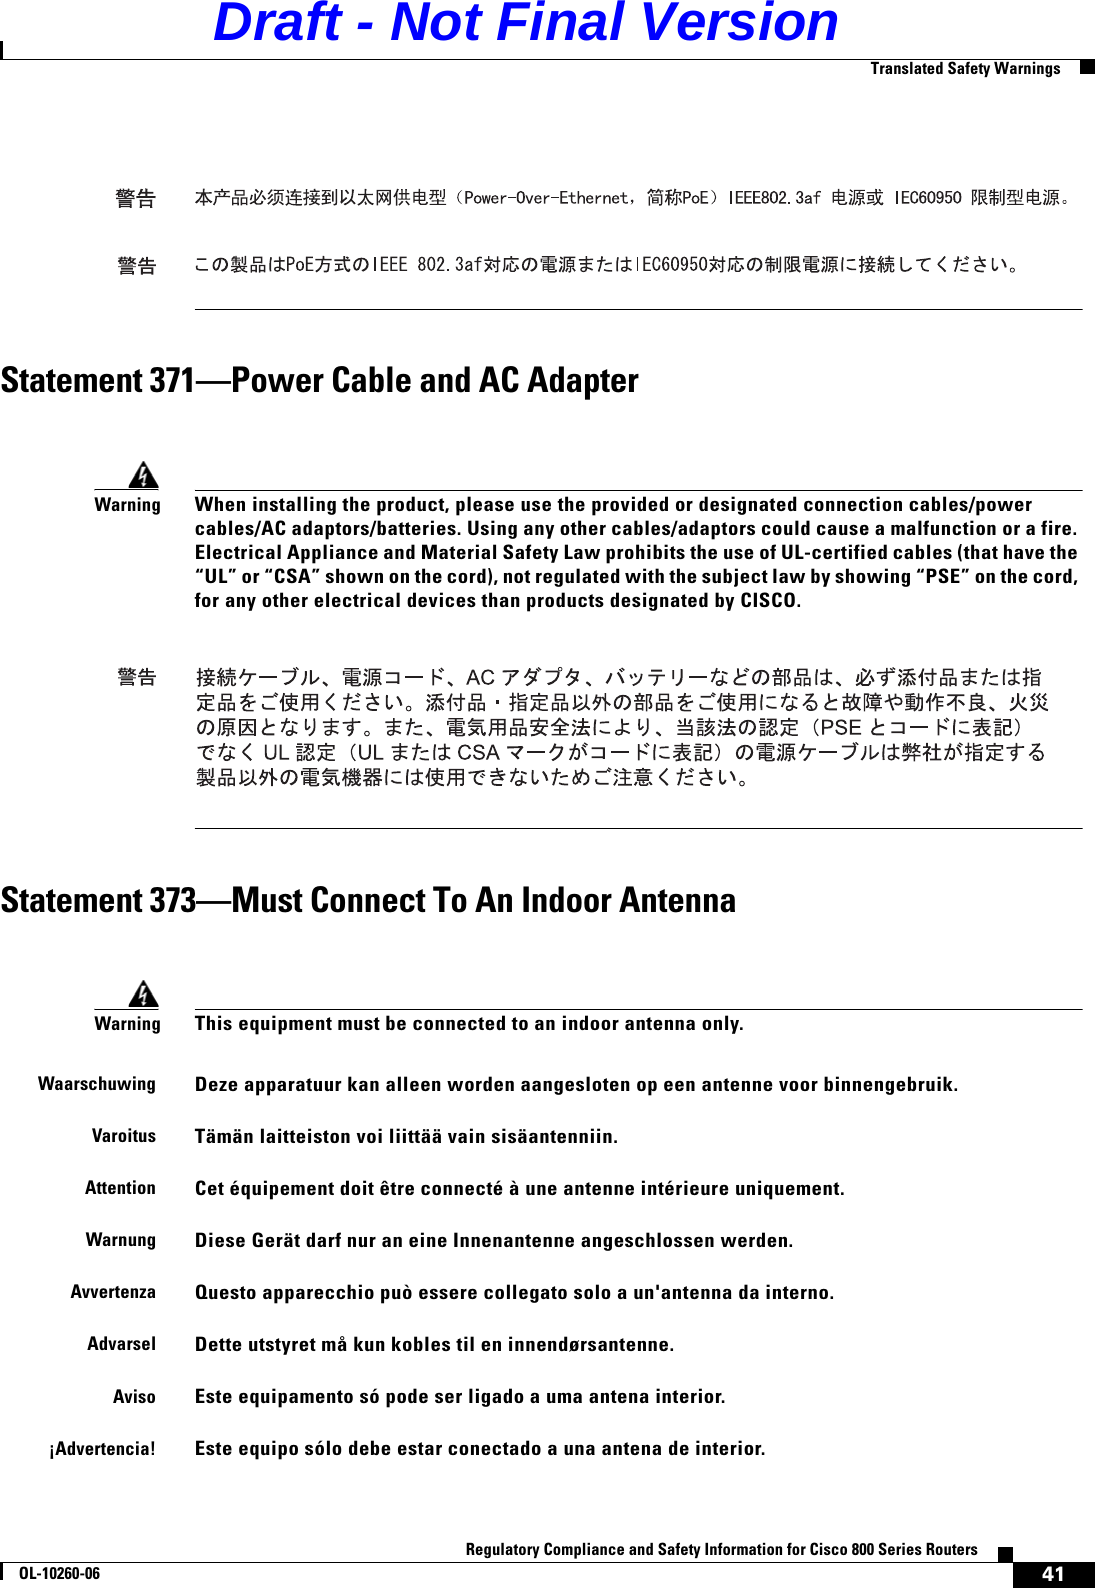 41Regulatory Compliance and Safety Information for Cisco 800 Series RoutersOL-10260-06  Translated Safety WarningsStatement 371—Power Cable and AC AdapterStatement 373—Must Connect To An Indoor AntennaWarningWhen installing the product, please use the provided or designated connection cables/power cables/AC adaptors/batteries. Using any other cables/adaptors could cause a malfunction or a fire. Electrical Appliance and Material Safety Law prohibits the use of UL-certified cables (that have the “UL” or “CSA” shown on the cord), not regulated with the subject law by showing “PSE” on the cord, for any other electrical devices than products designated by CISCO.WarningThis equipment must be connected to an indoor antenna only.WaarschuwingDeze apparatuur kan alleen worden aangesloten op een antenne voor binnengebruik.VaroitusTämän laitteiston voi liittää vain sisäantenniin.AttentionCet équipement doit être connecté à une antenne intérieure uniquement.WarnungDiese Gerät darf nur an eine Innenantenne angeschlossen werden.AvvertenzaQuesto apparecchio può essere collegato solo a un&apos;antenna da interno.AdvarselDette utstyret må kun kobles til en innendørsantenne.AvisoEste equipamento só pode ser ligado a uma antena interior.¡Advertencia!Este equipo sólo debe estar conectado a una antena de interior.Draft - Not Final Version